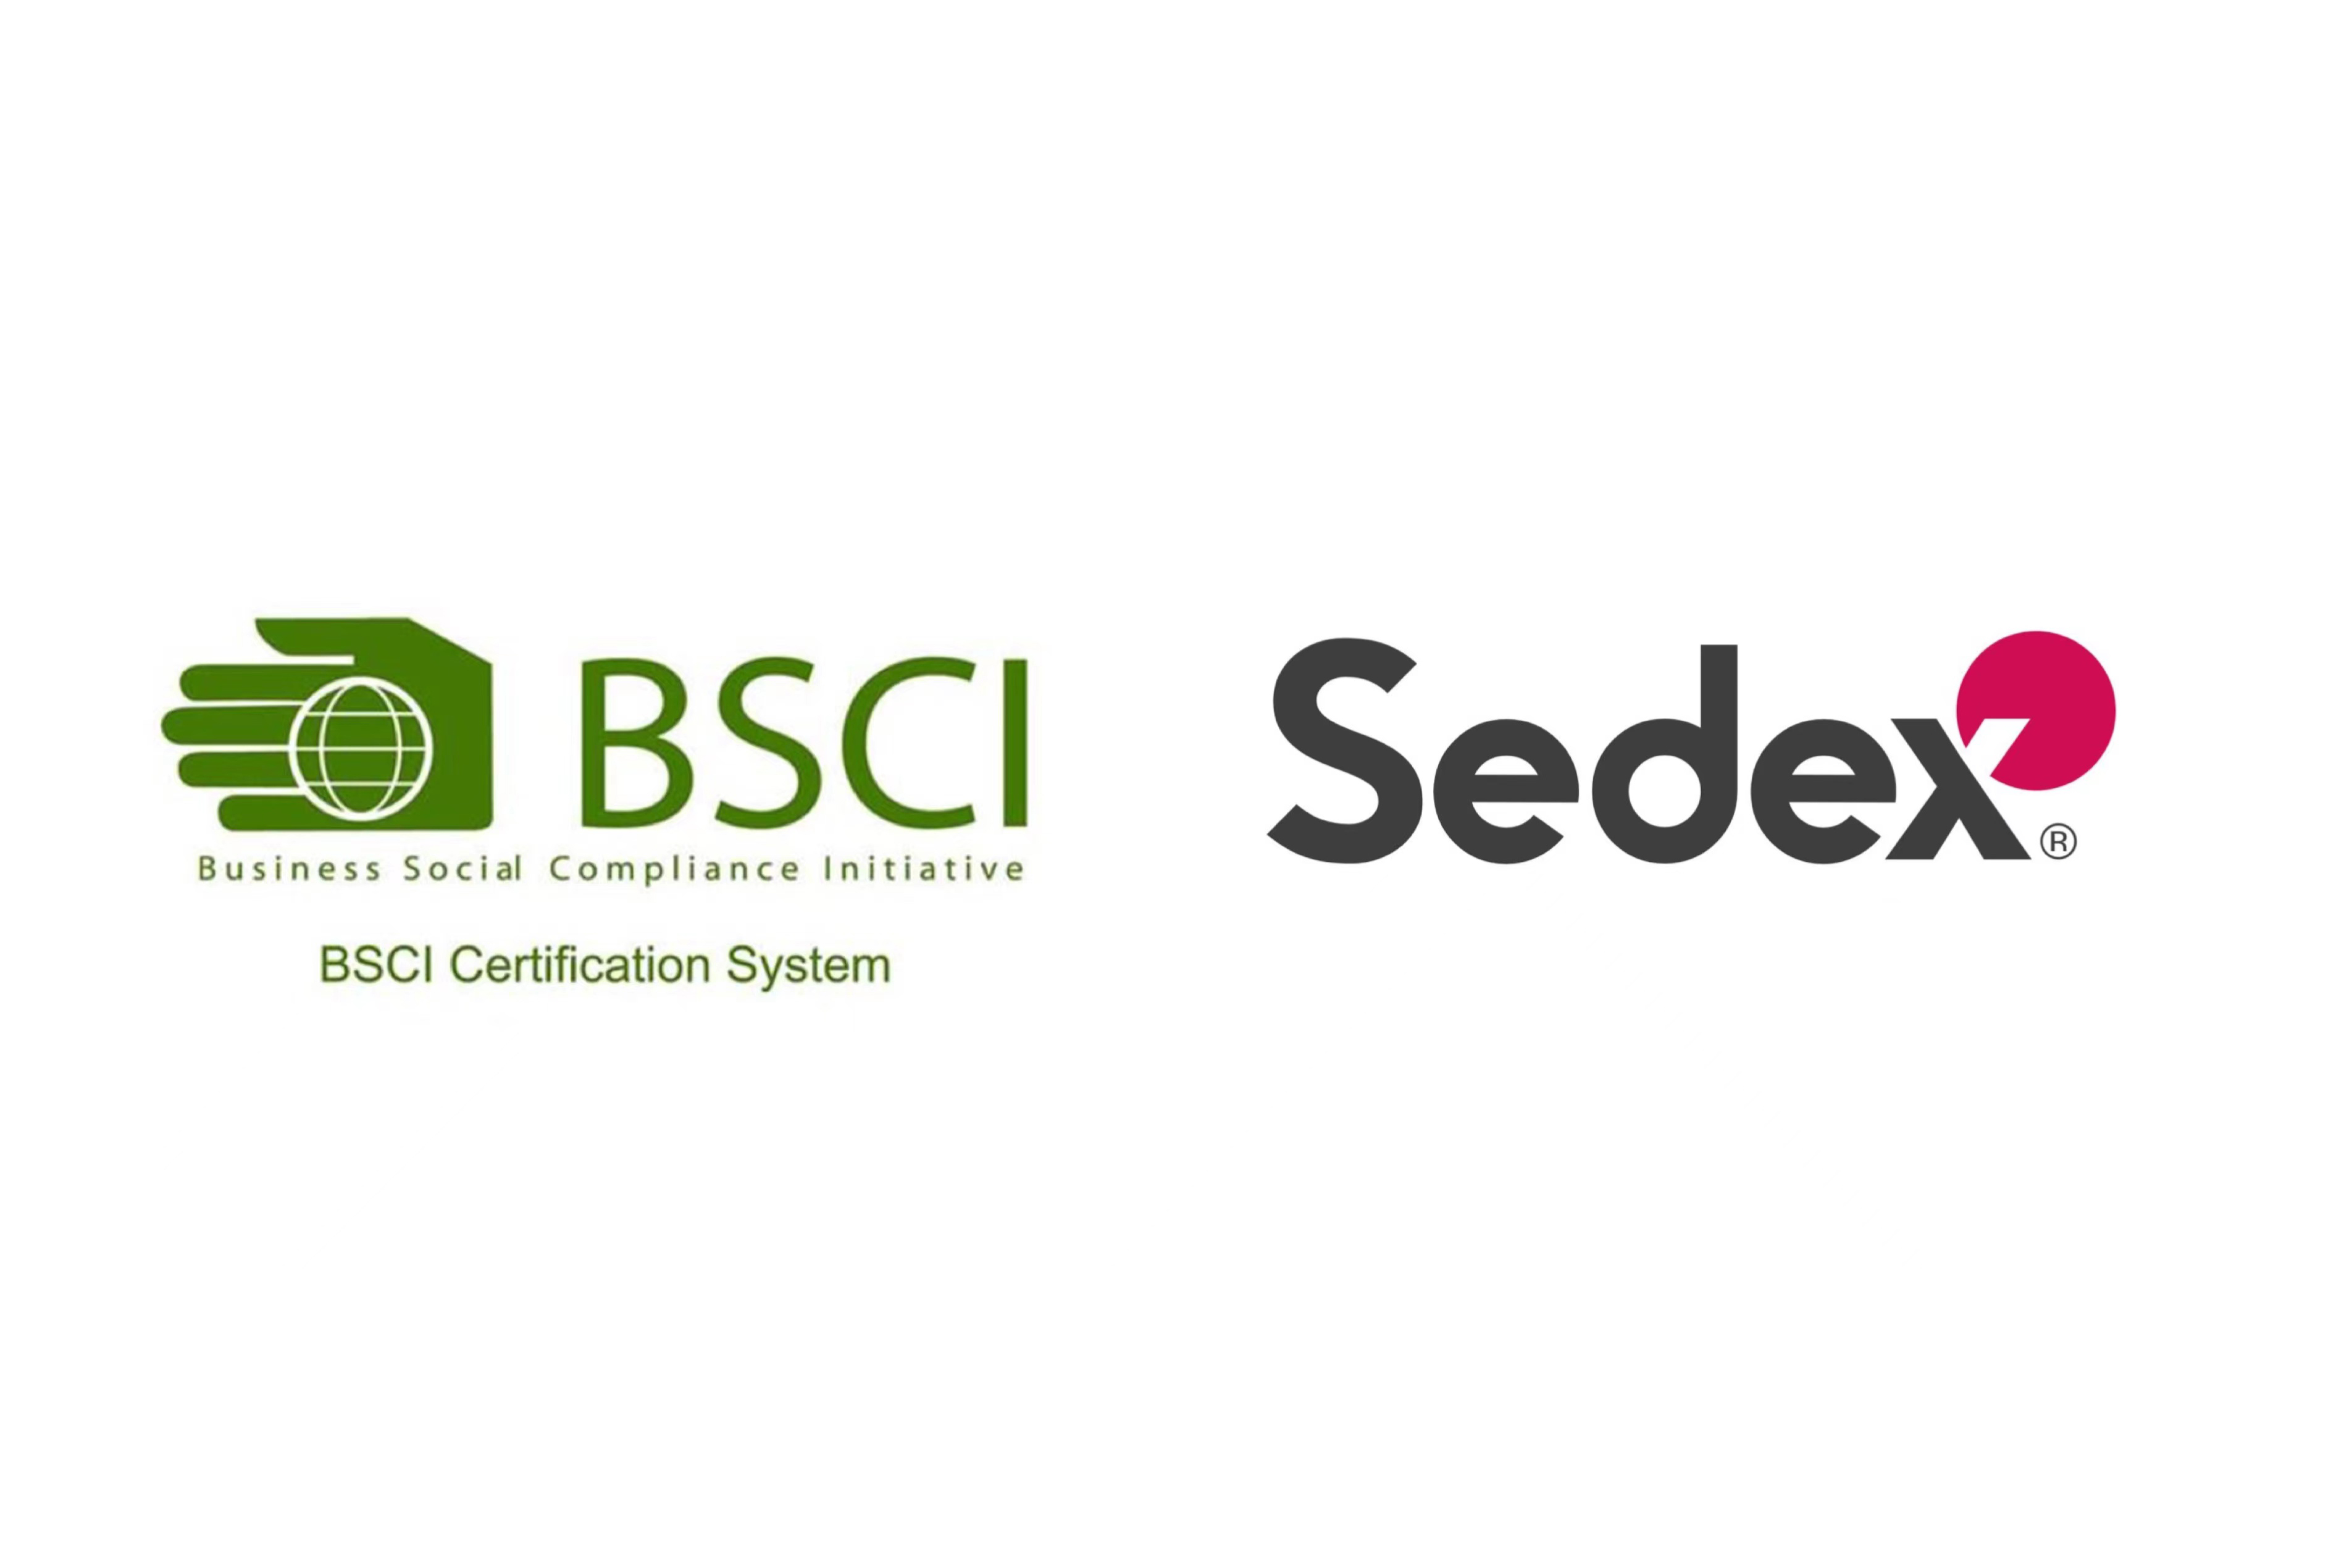 What’s the difference between BSCI and Sedex?